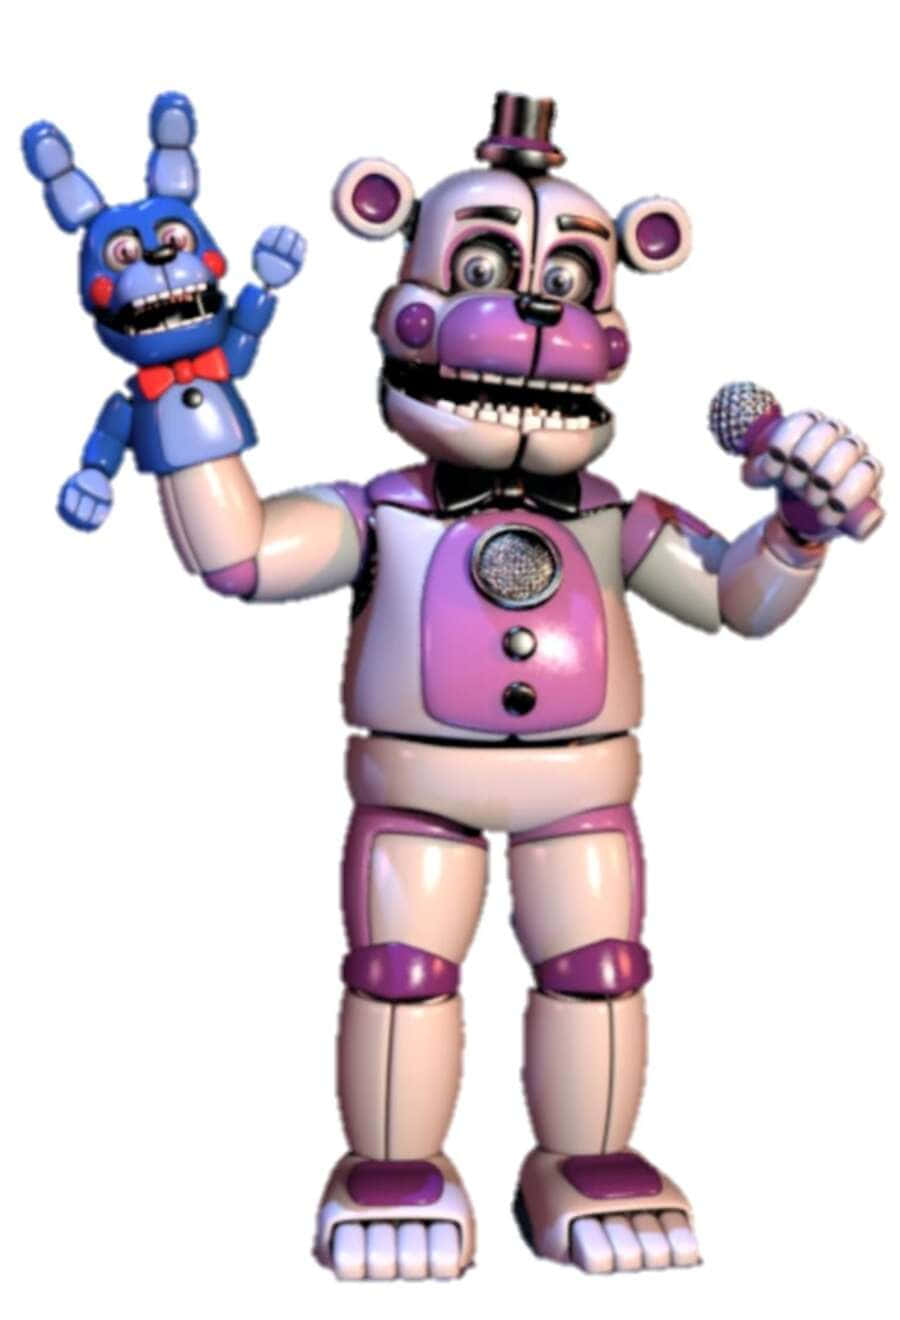 Caption: Funtime Freddy - The Iconic Animatronic Entertainer Wallpaper